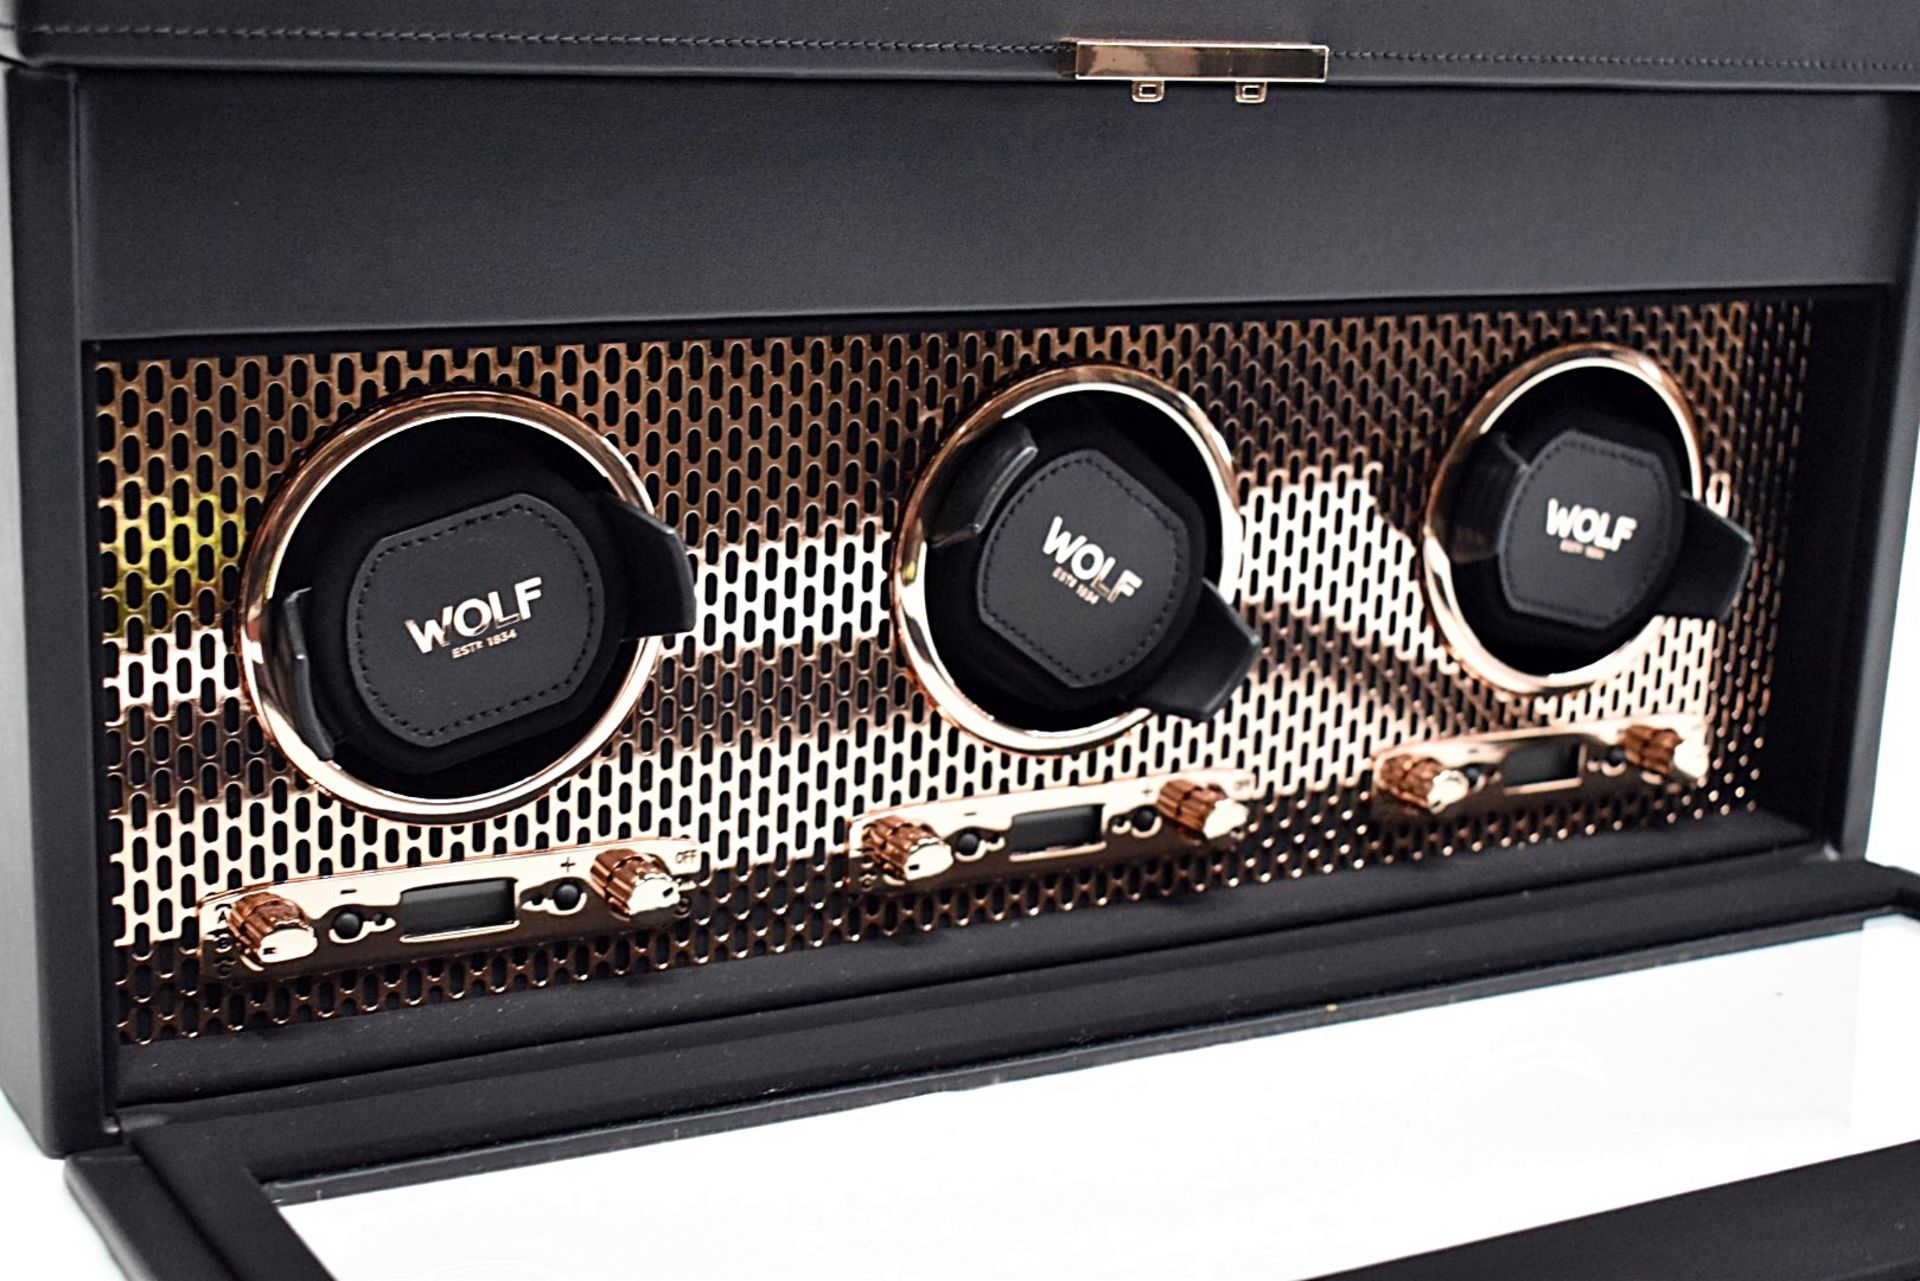 1 x WOLF 'Axis' Luxury Triple Watch Winder With Storage - Original Price £1,809 - Unused Boxed Stock - Image 19 of 32